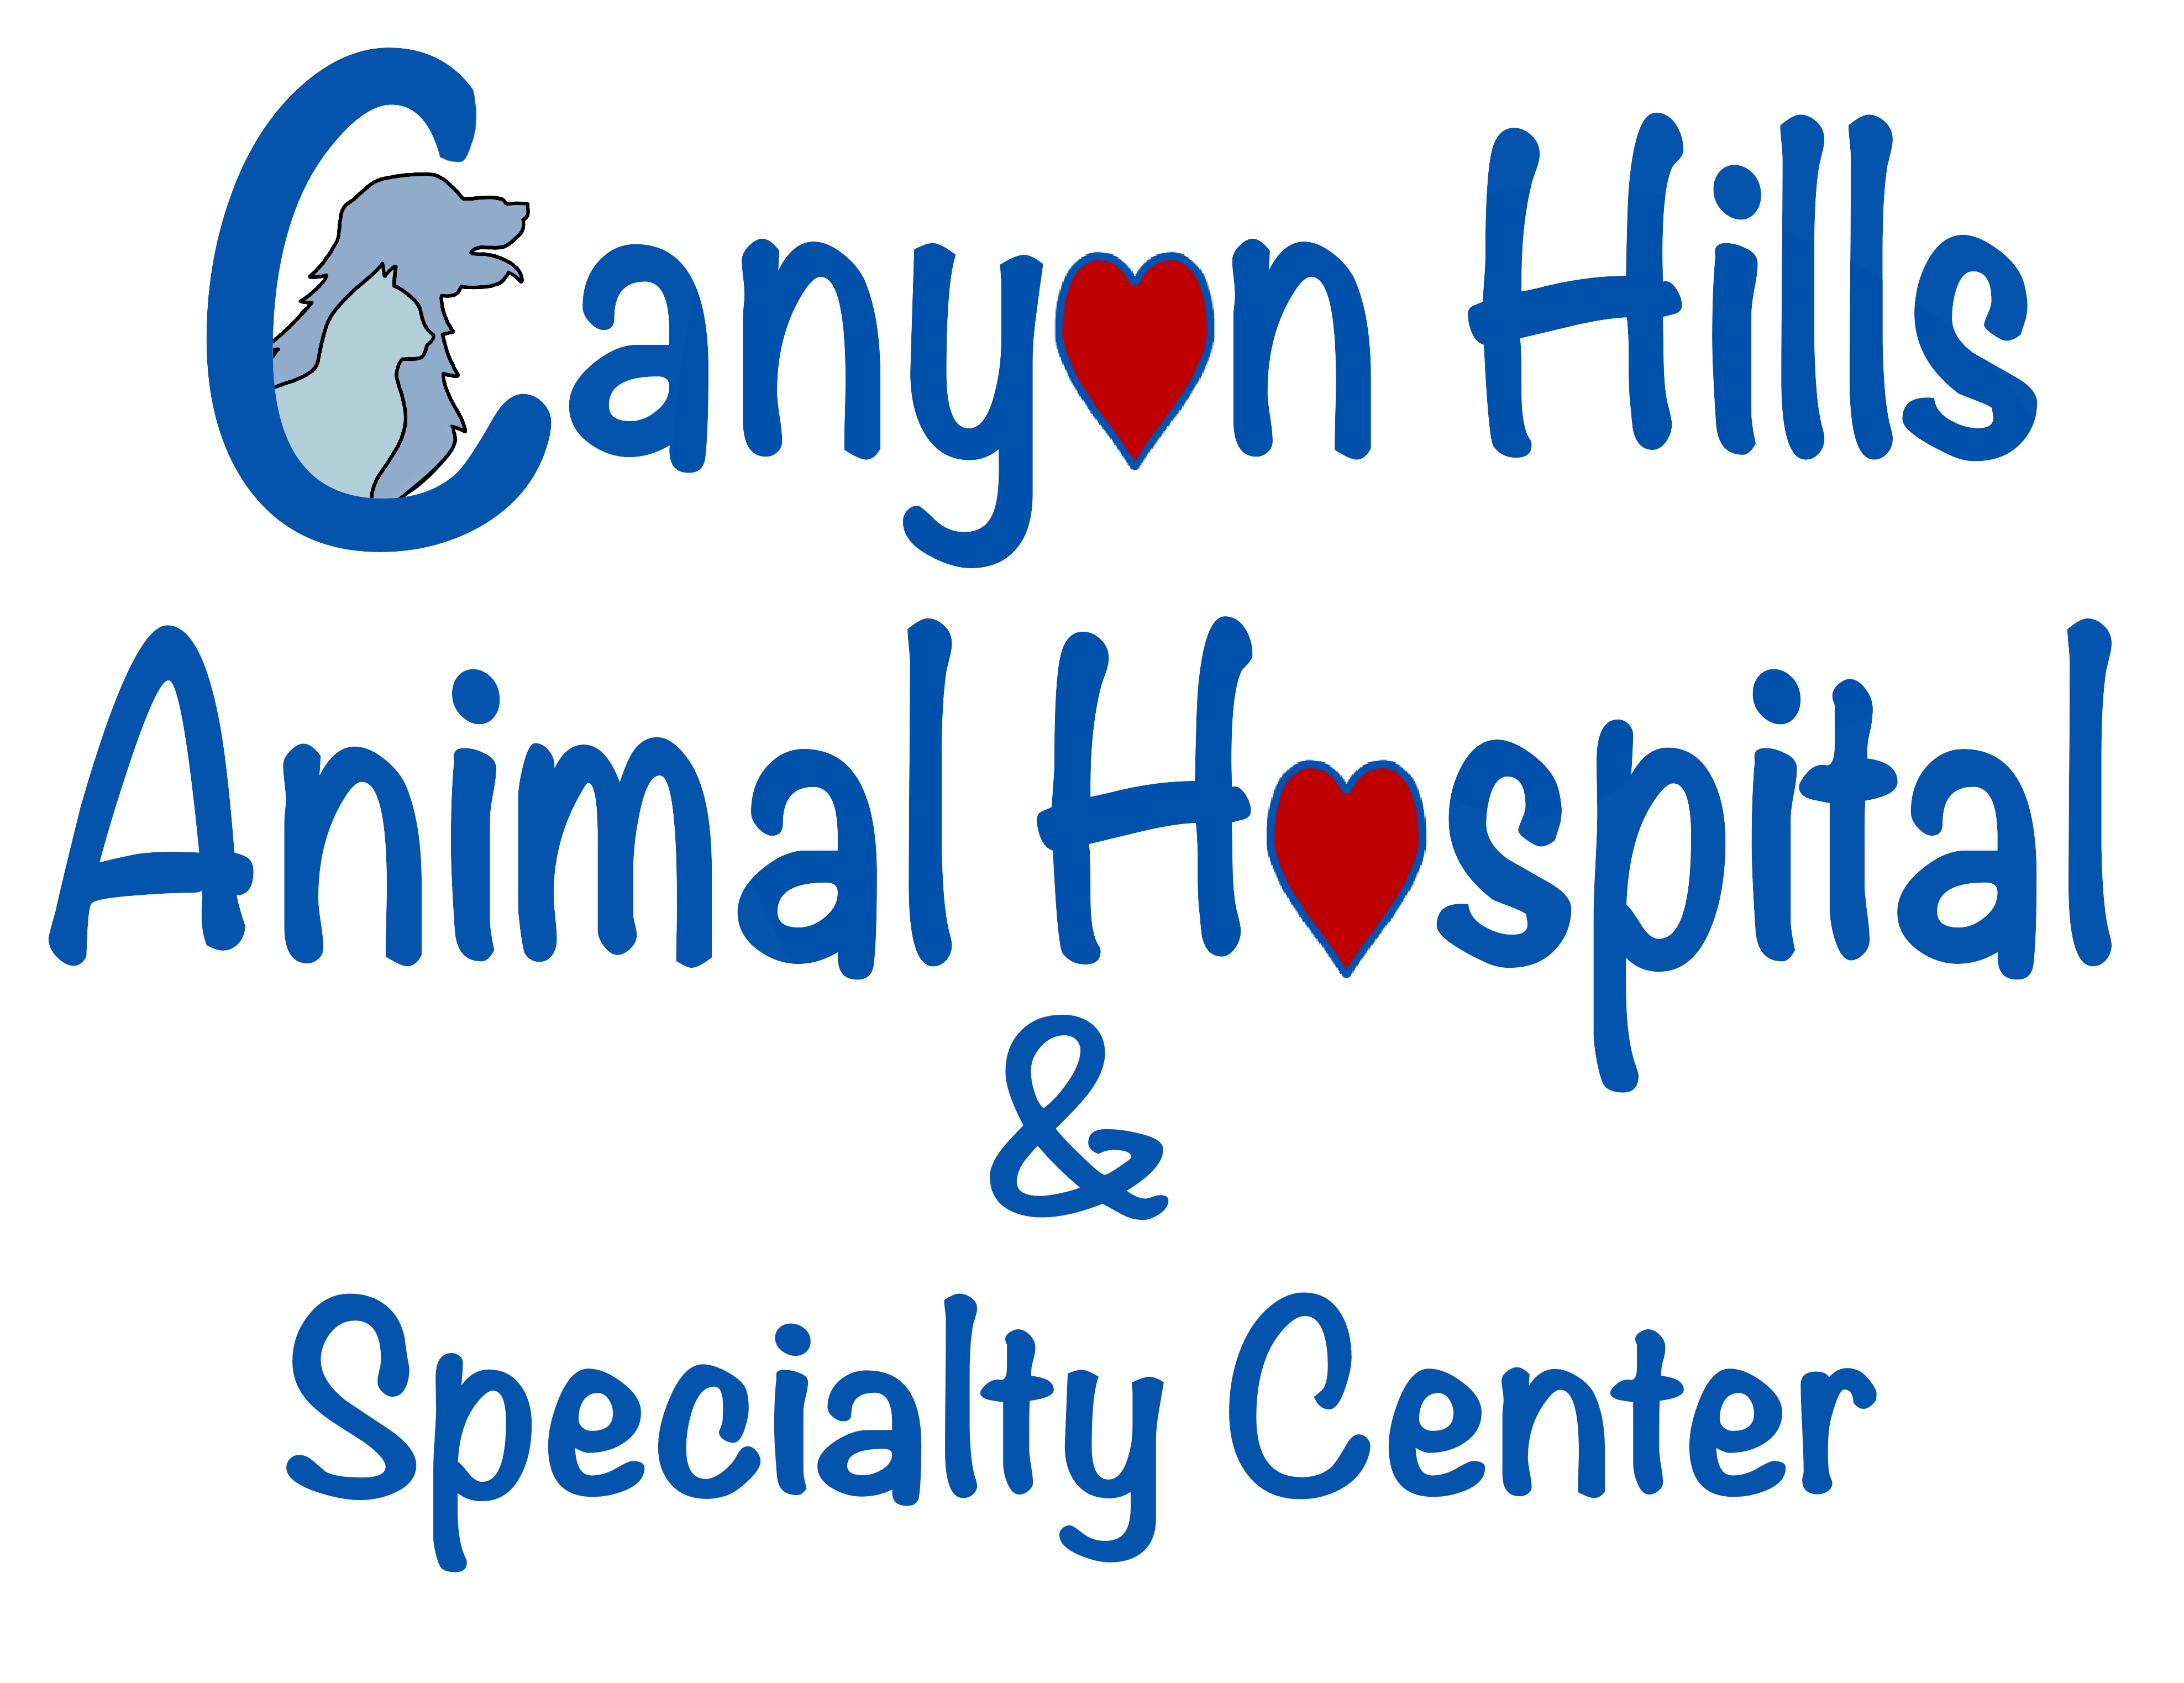 Canyon Hills Animal Hospital & Specialty Center